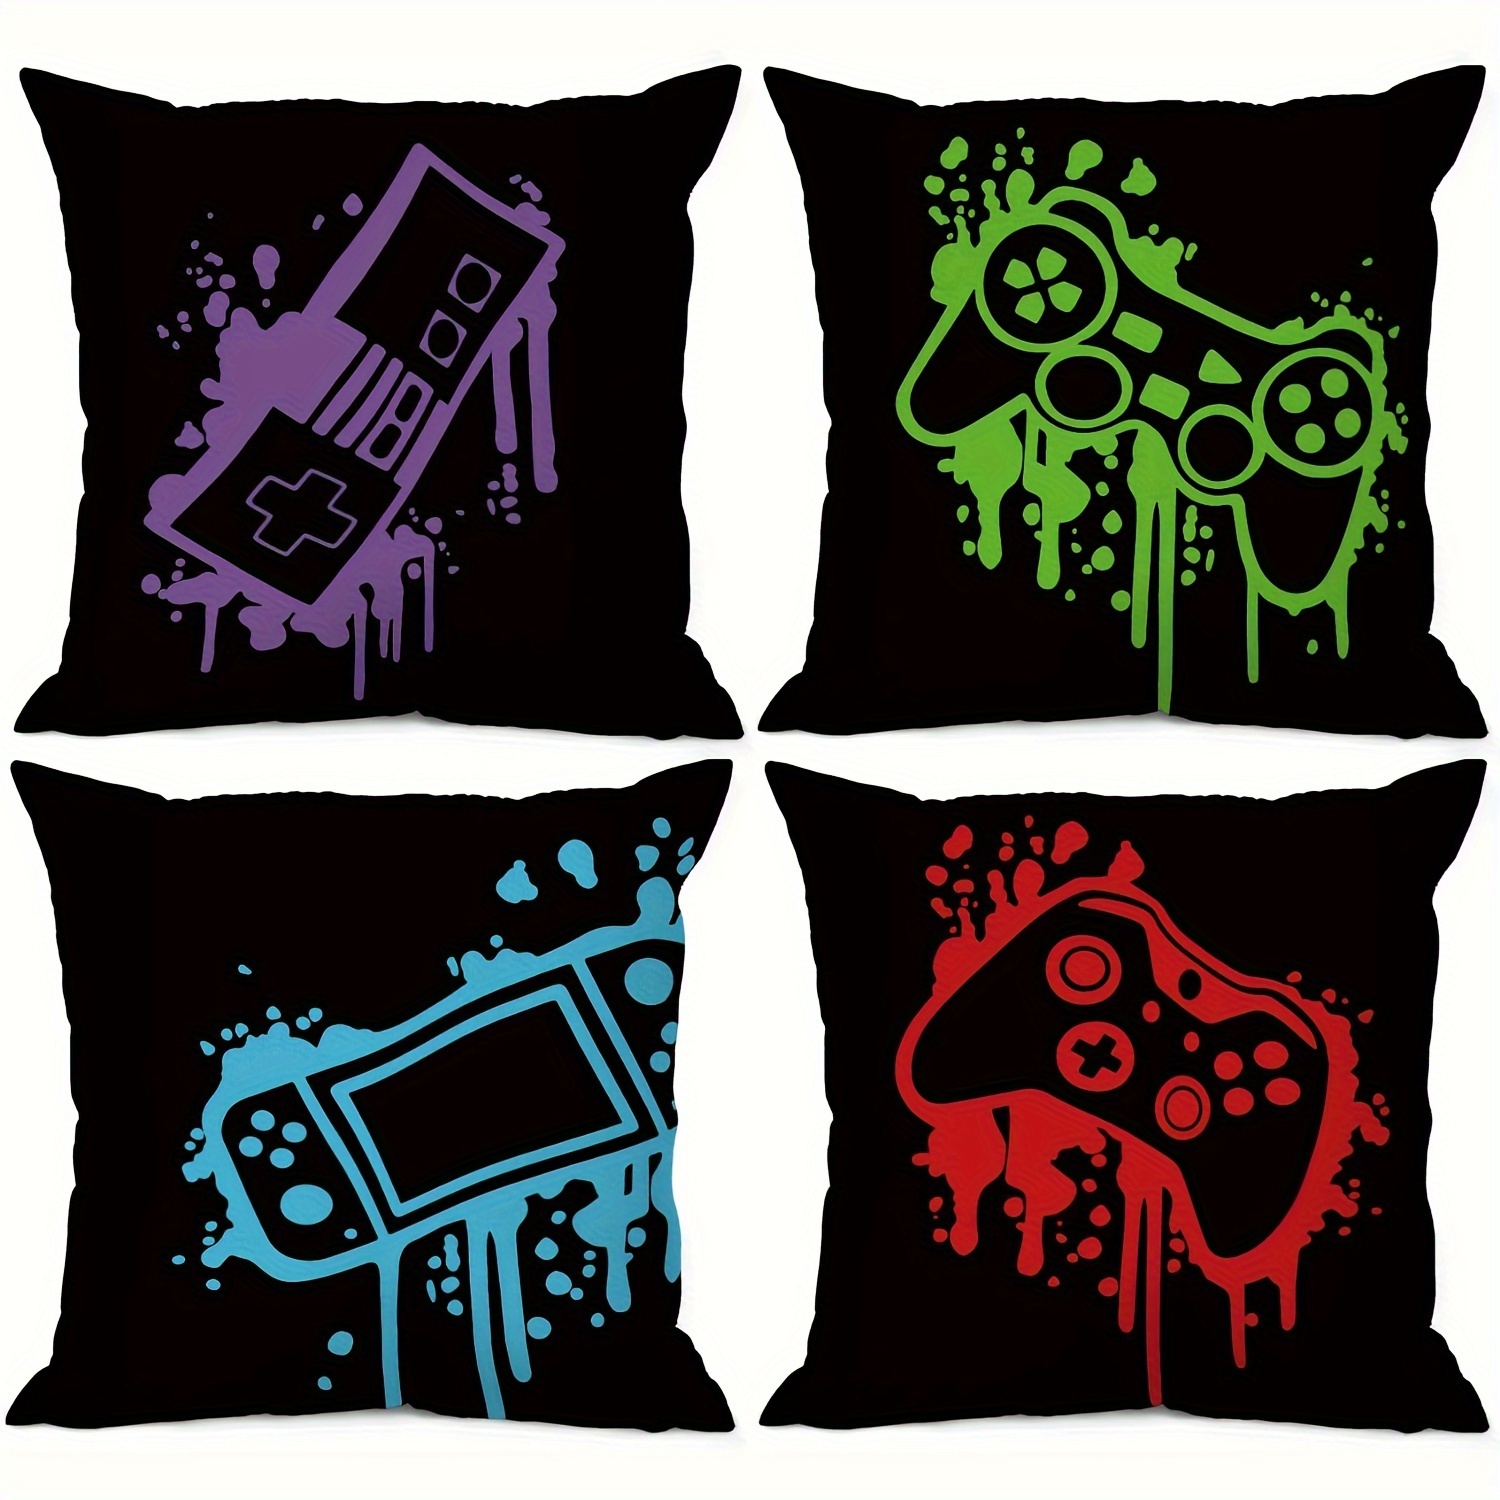 

4pcs Colorful Video Game Controller Teen Gaming Throw Pillow Cover Pillowcase Decor Gamer Controller Sofa Boys Room Playroom Home Decoration Short Plush Decor 18x18 Inch Without Pillow Core